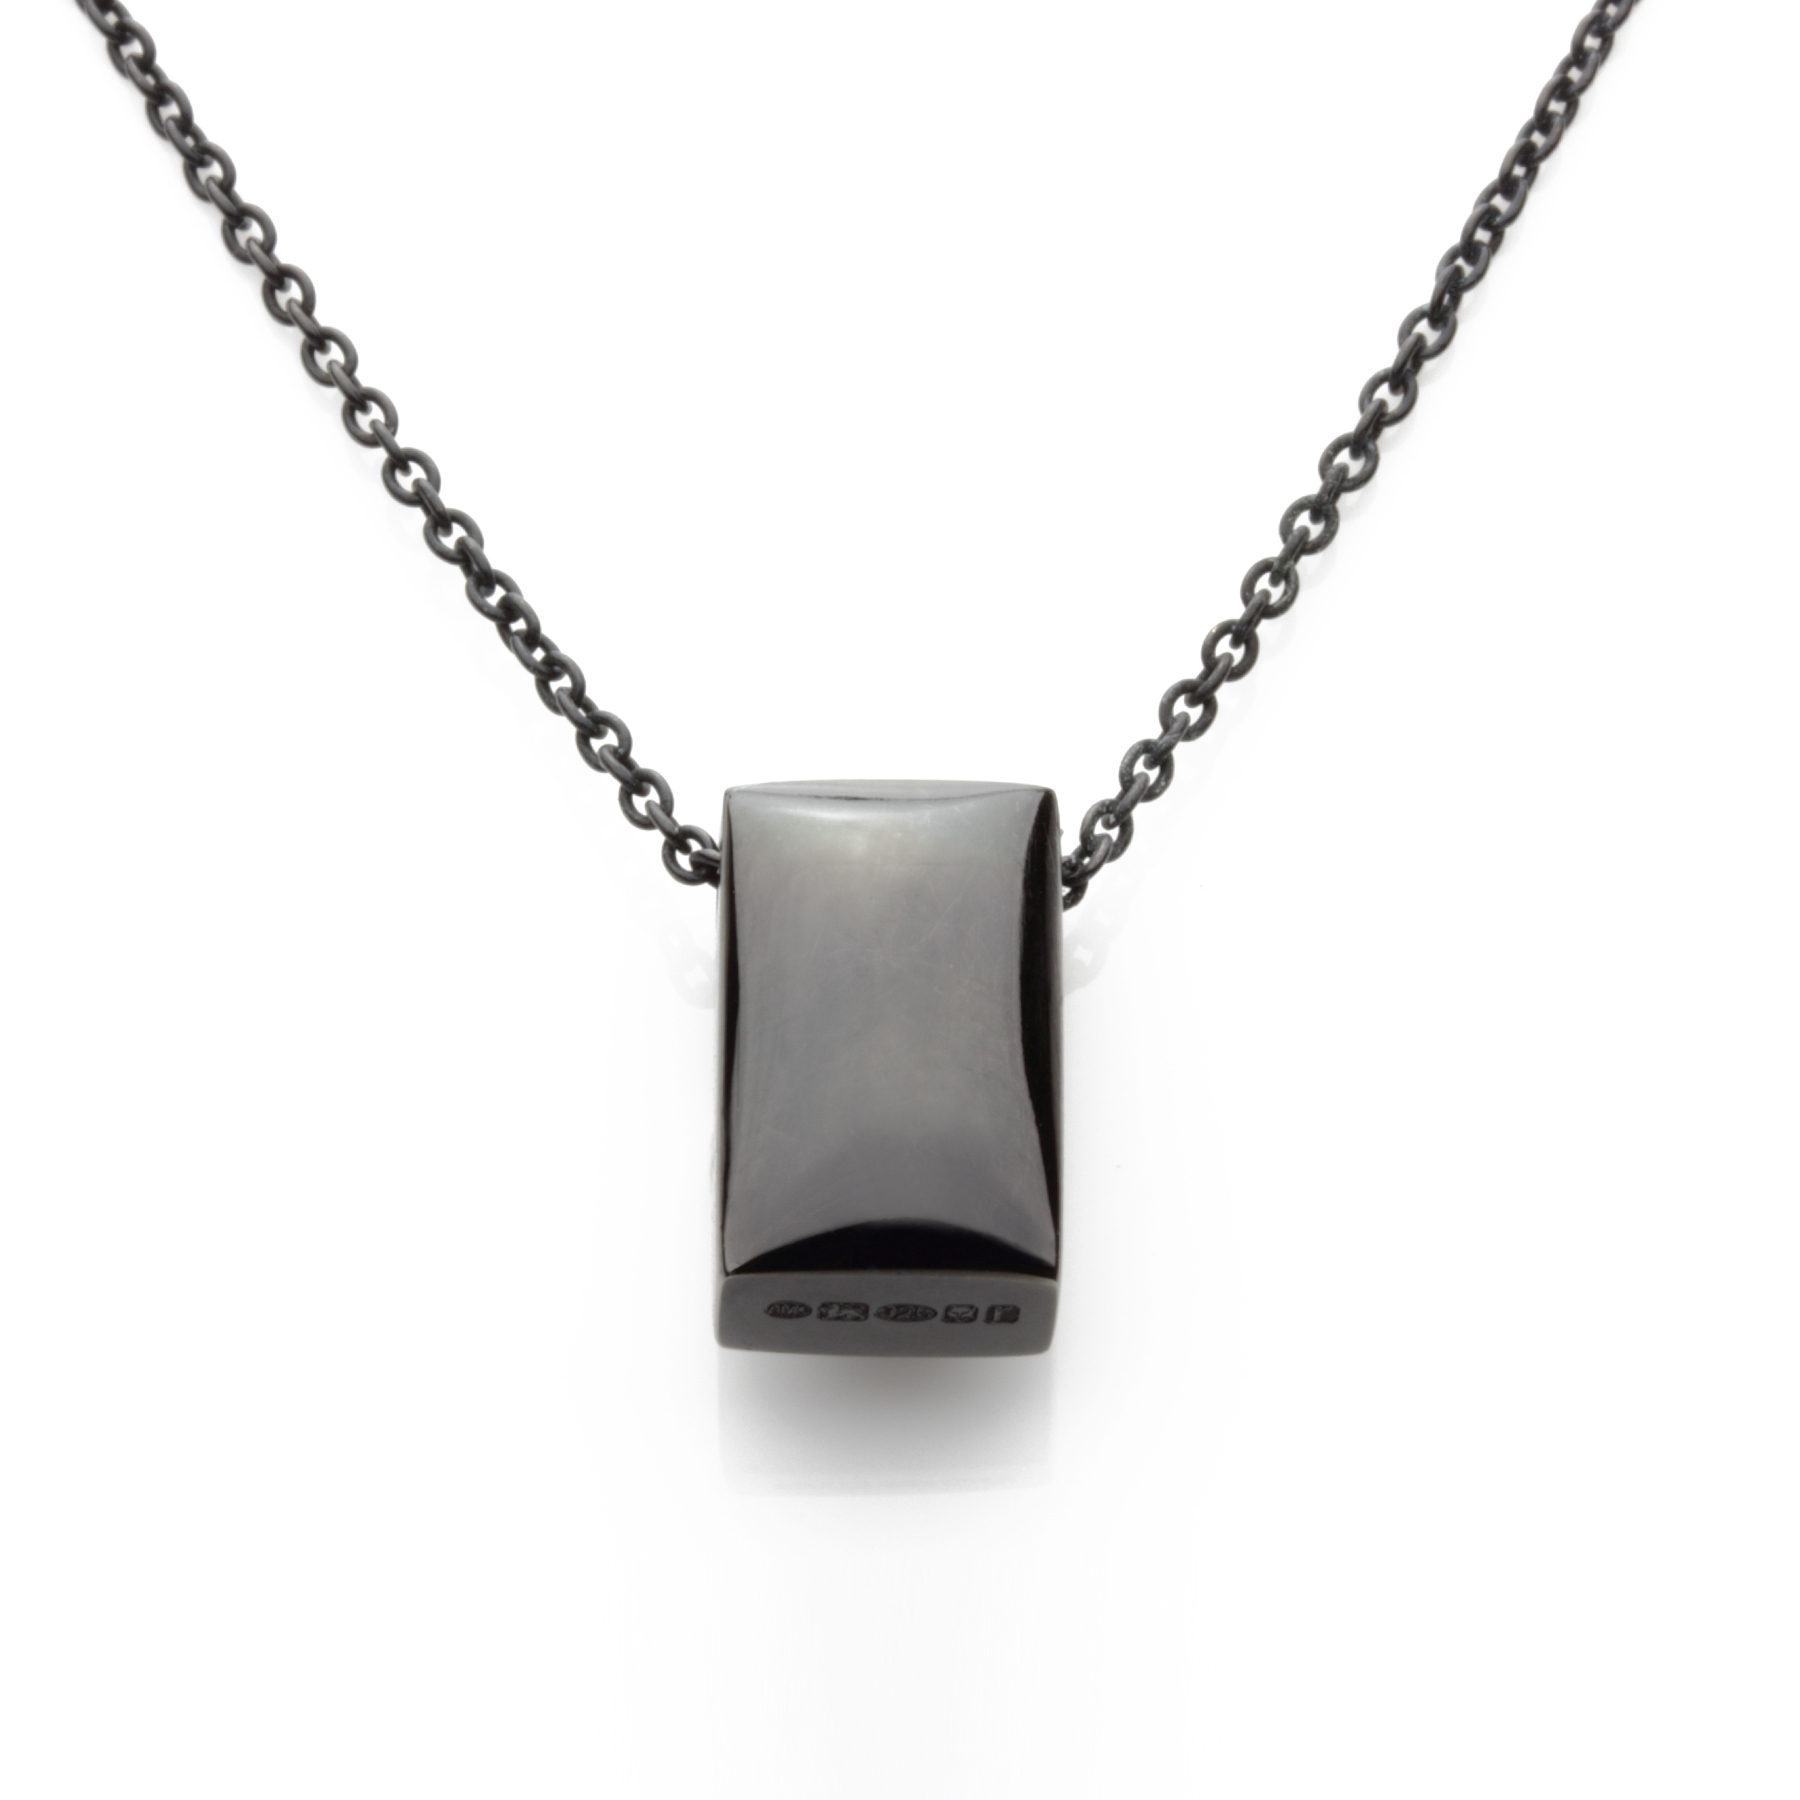 Rectangular 'Pillow' pendant on chain in highly polished ruthenium ...